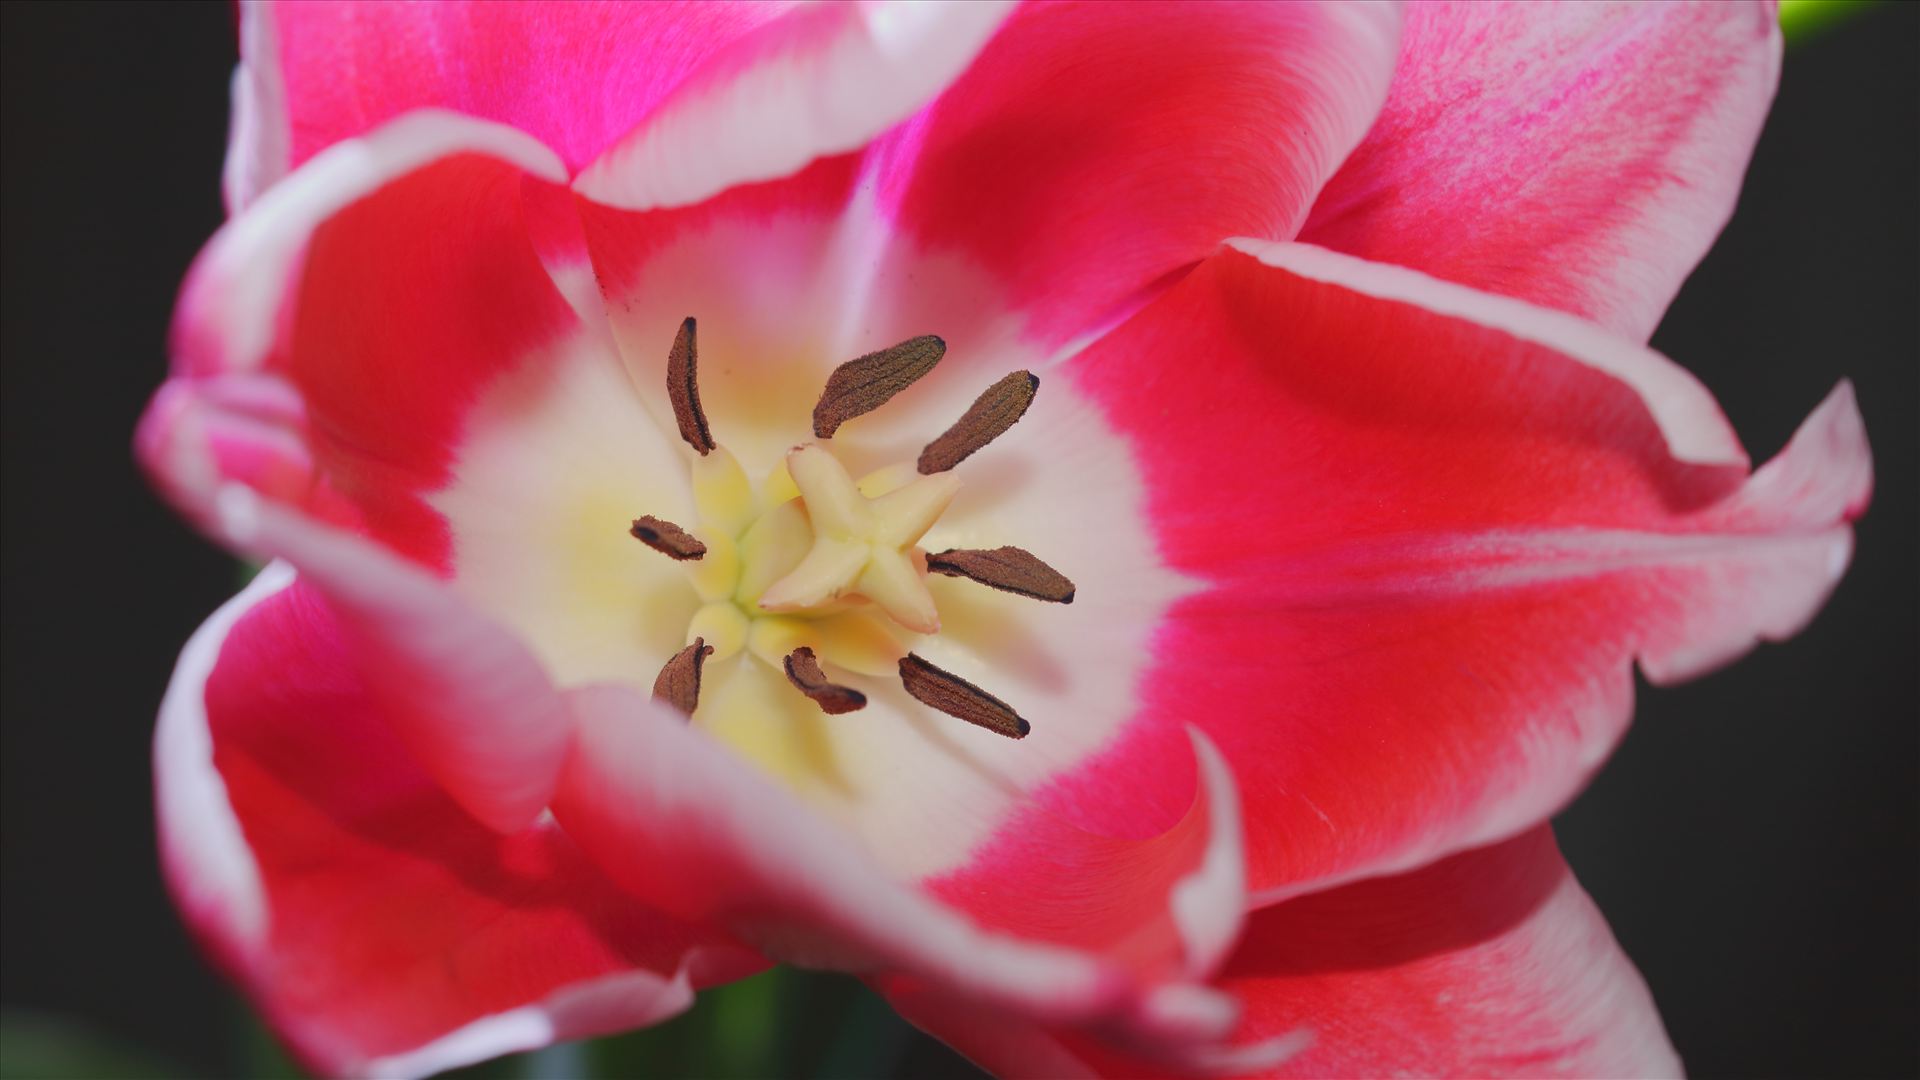 tulip.JPG close-up picture of a tulip flower by Goomba707